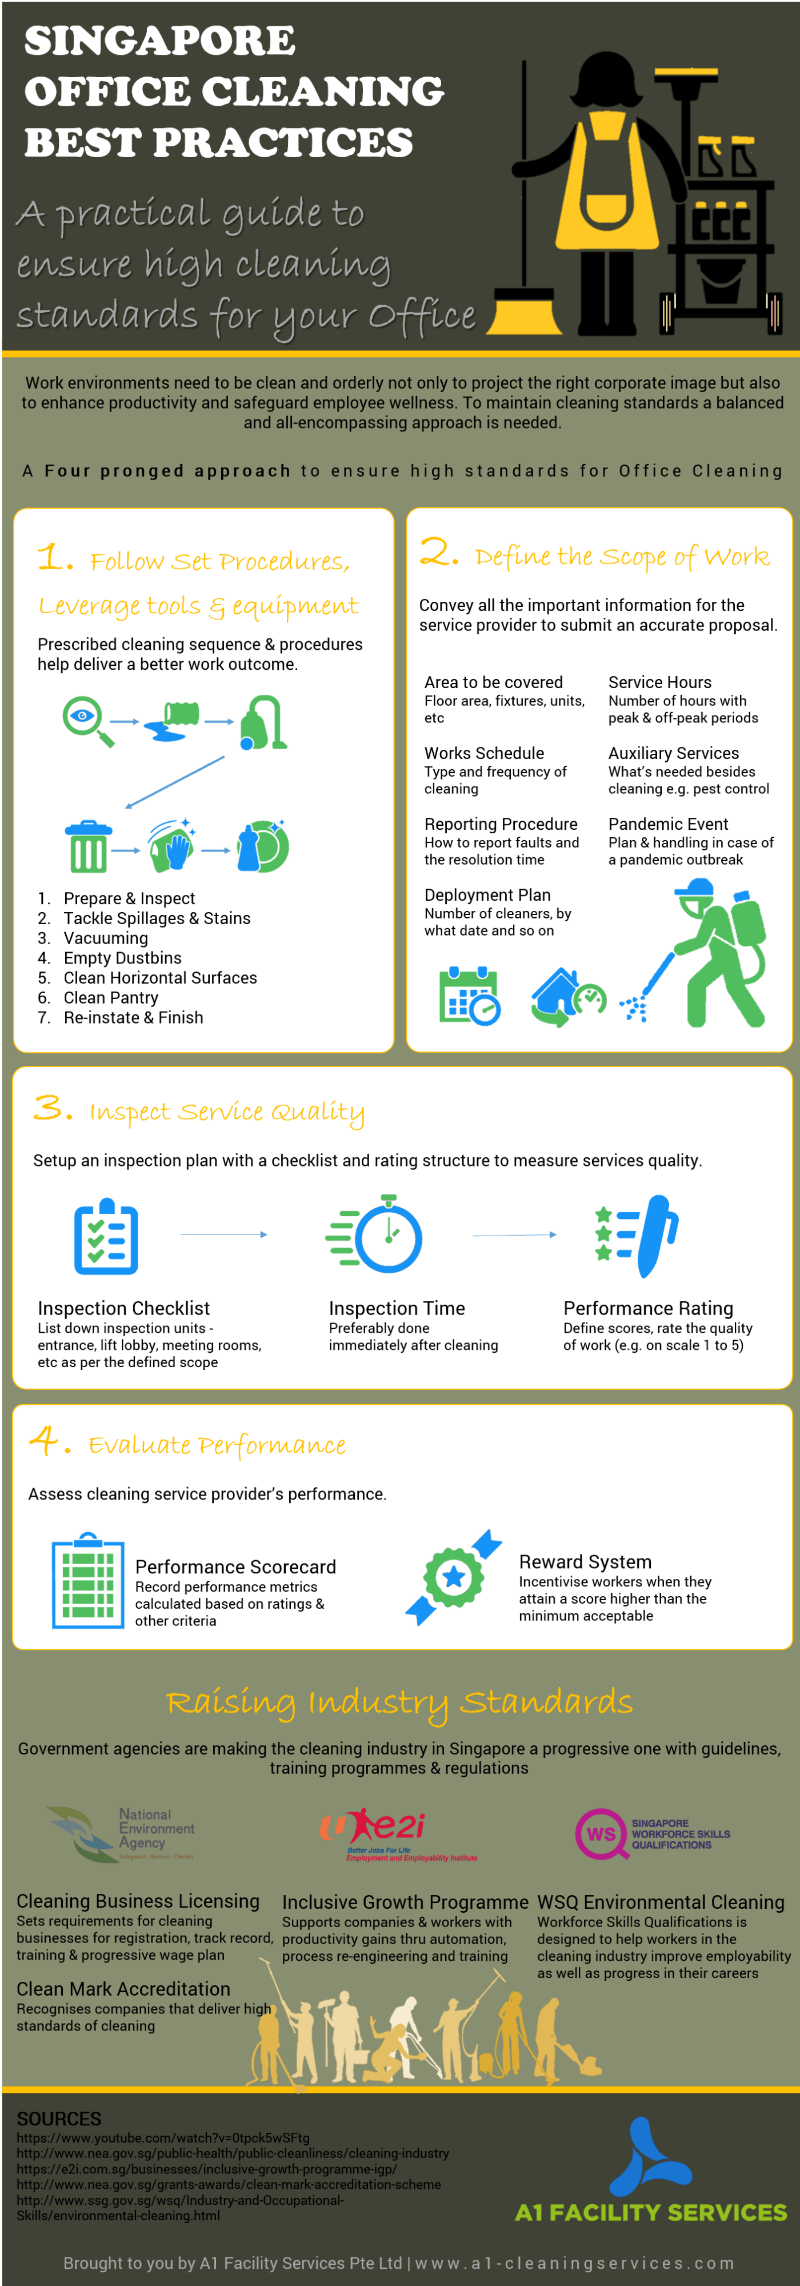 Infographic on cleaning best practices